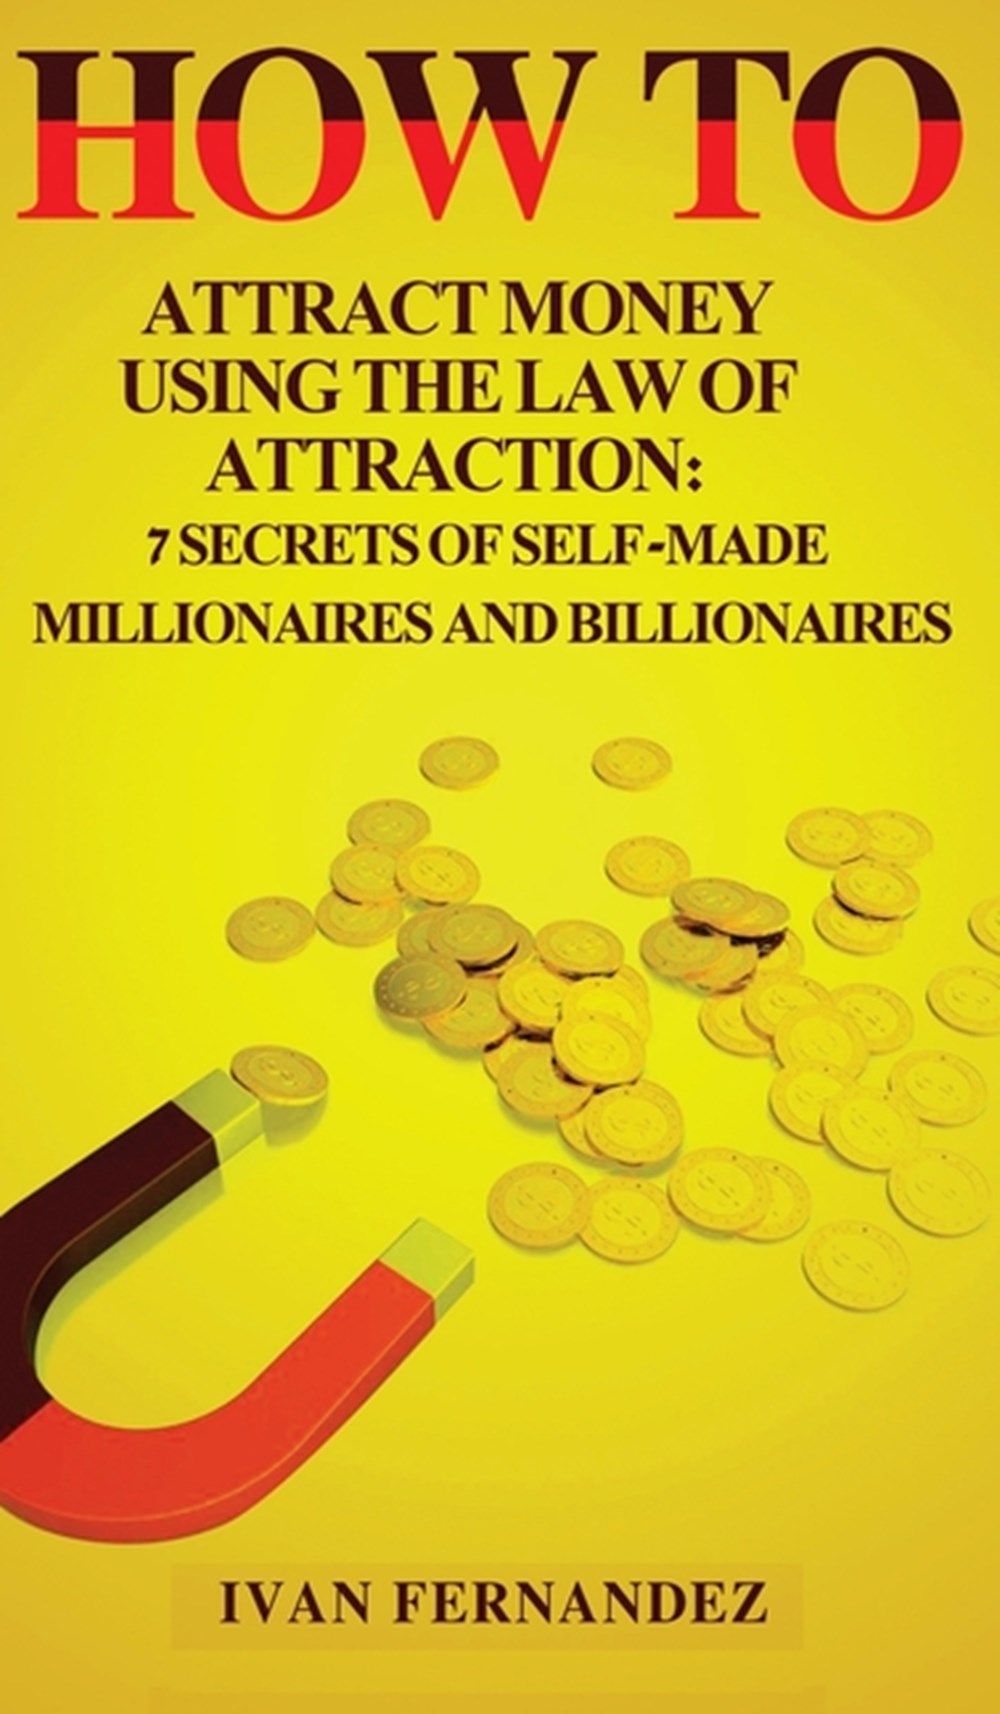 How to Attract Money Using the Law of Attraction: 7 Secrets of Self-Made Millionaires and Billionair